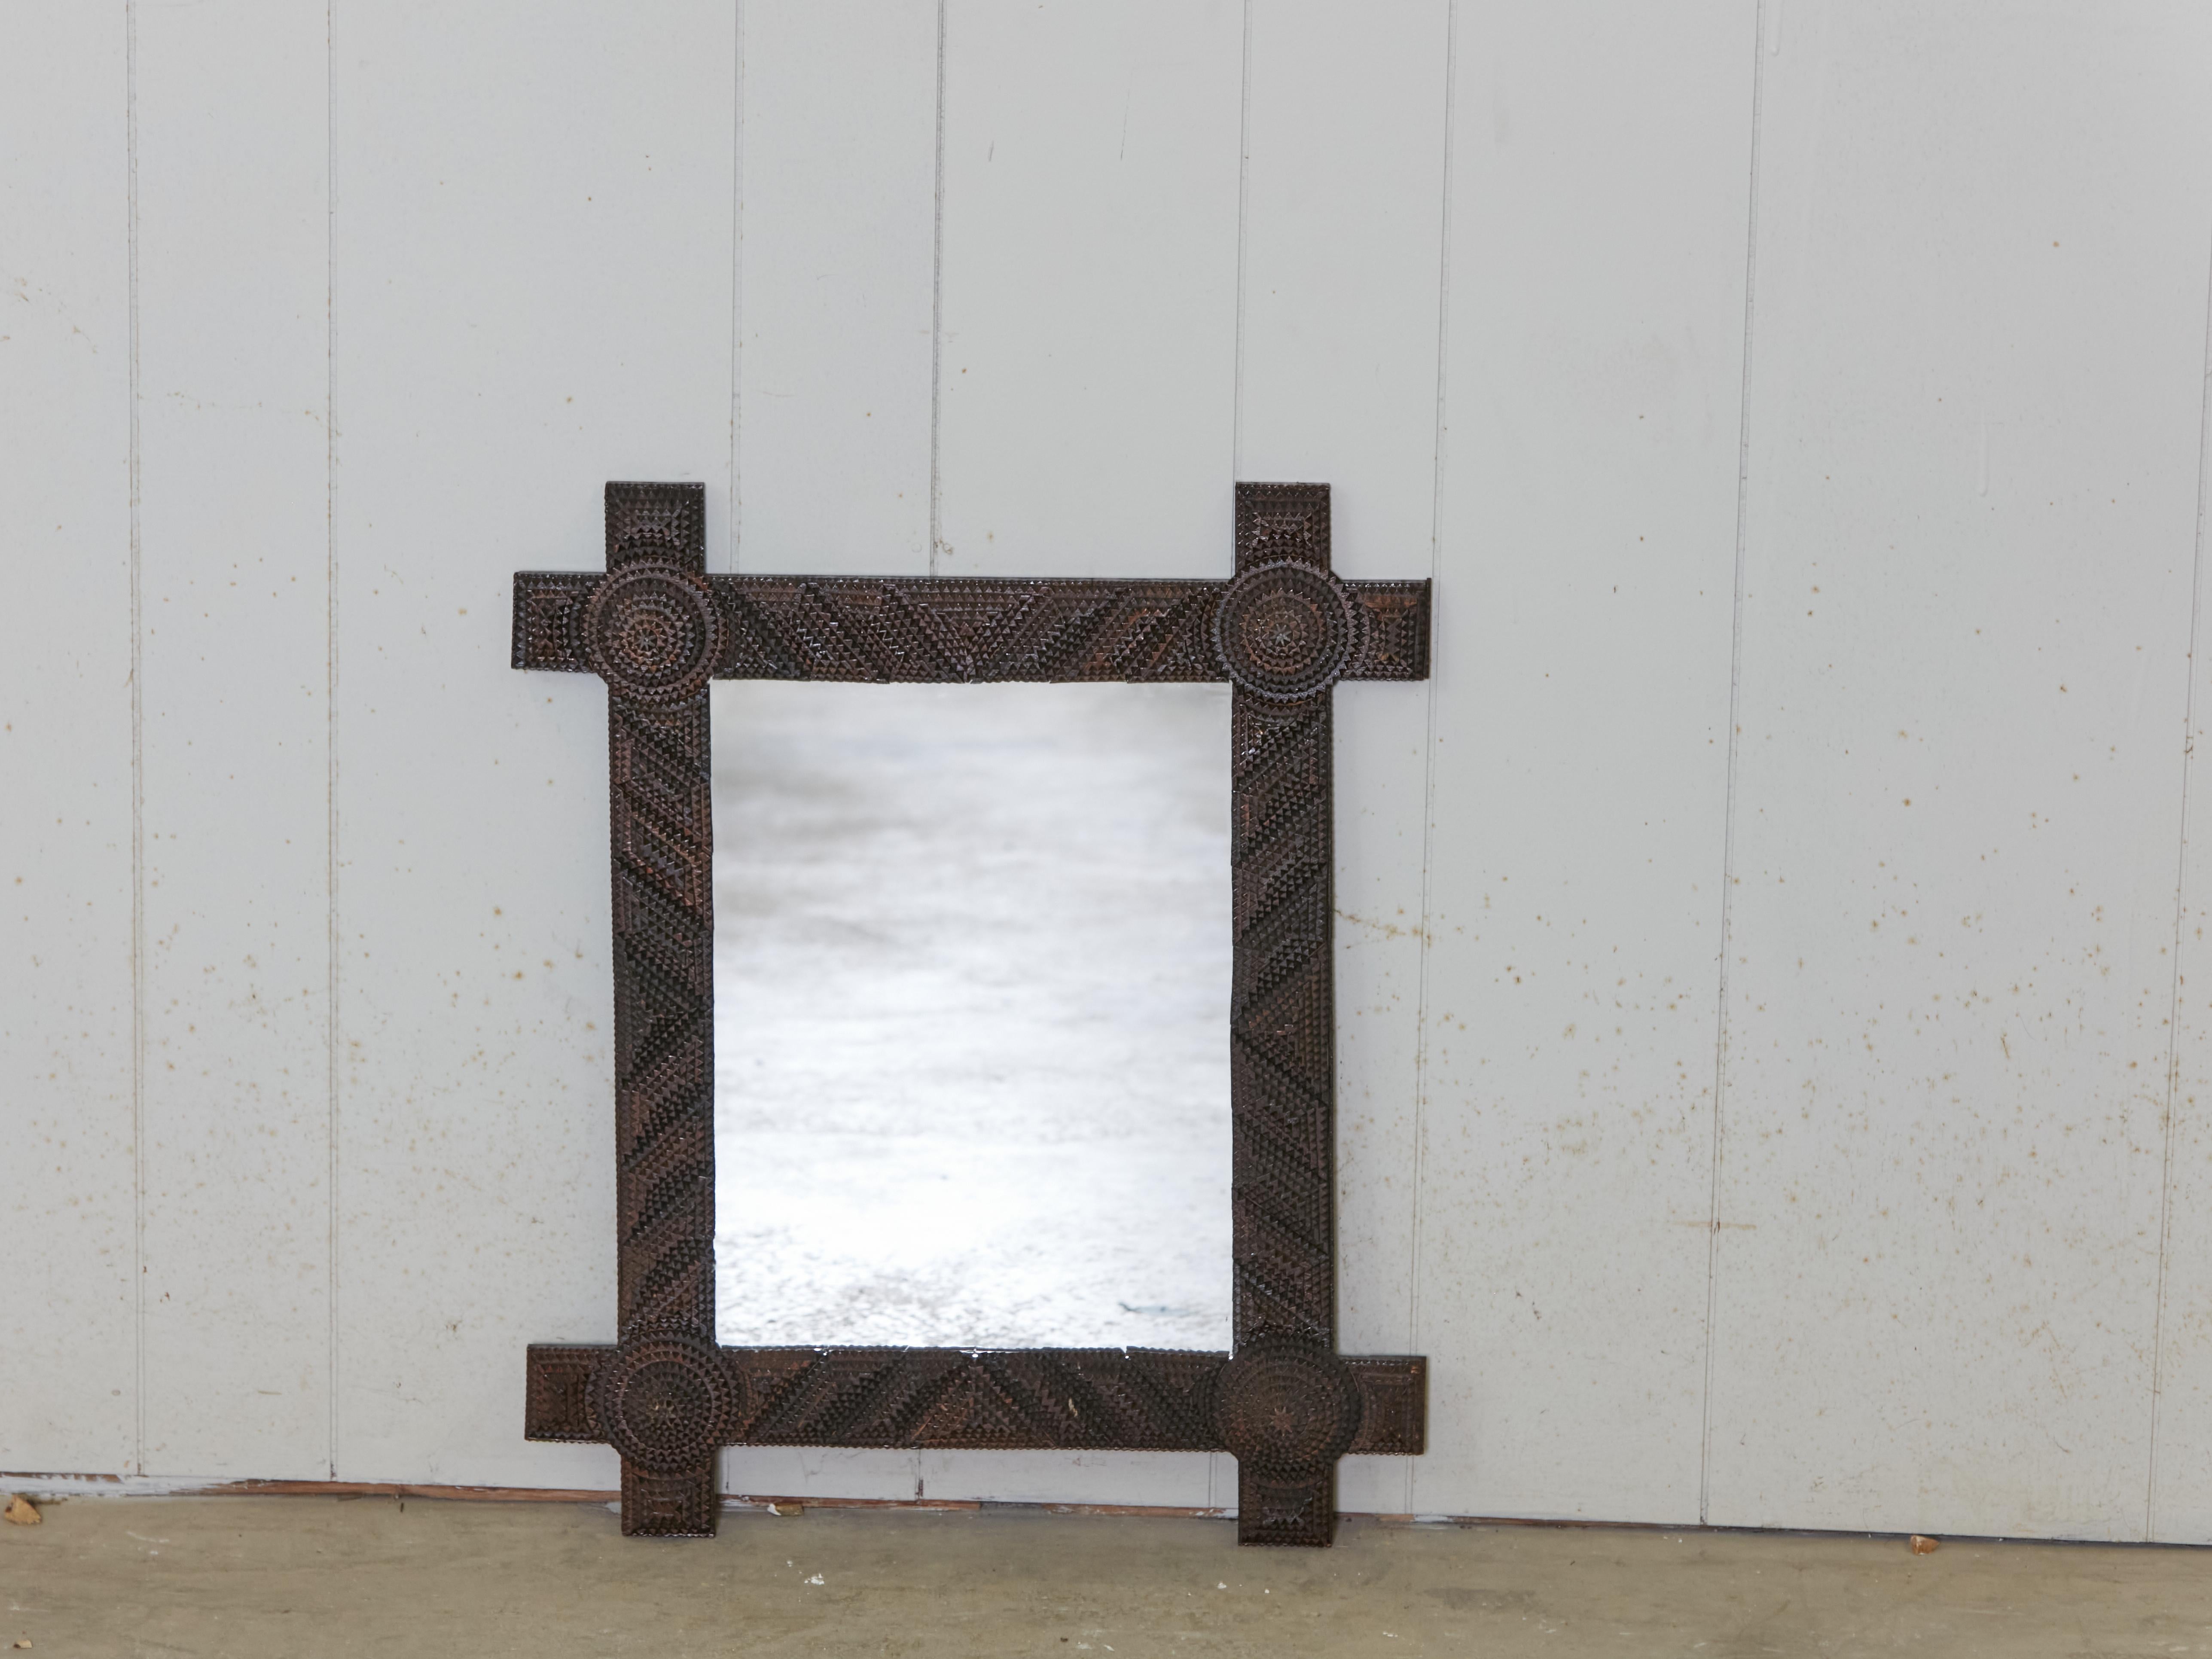 A French Turn of the century Tramp Art hand-carved mirror from the early 20th century, with raised concentric corners, geometric motifs and dark brown patina. Created in France during the Turn of the Century which saw the transition between the 19th